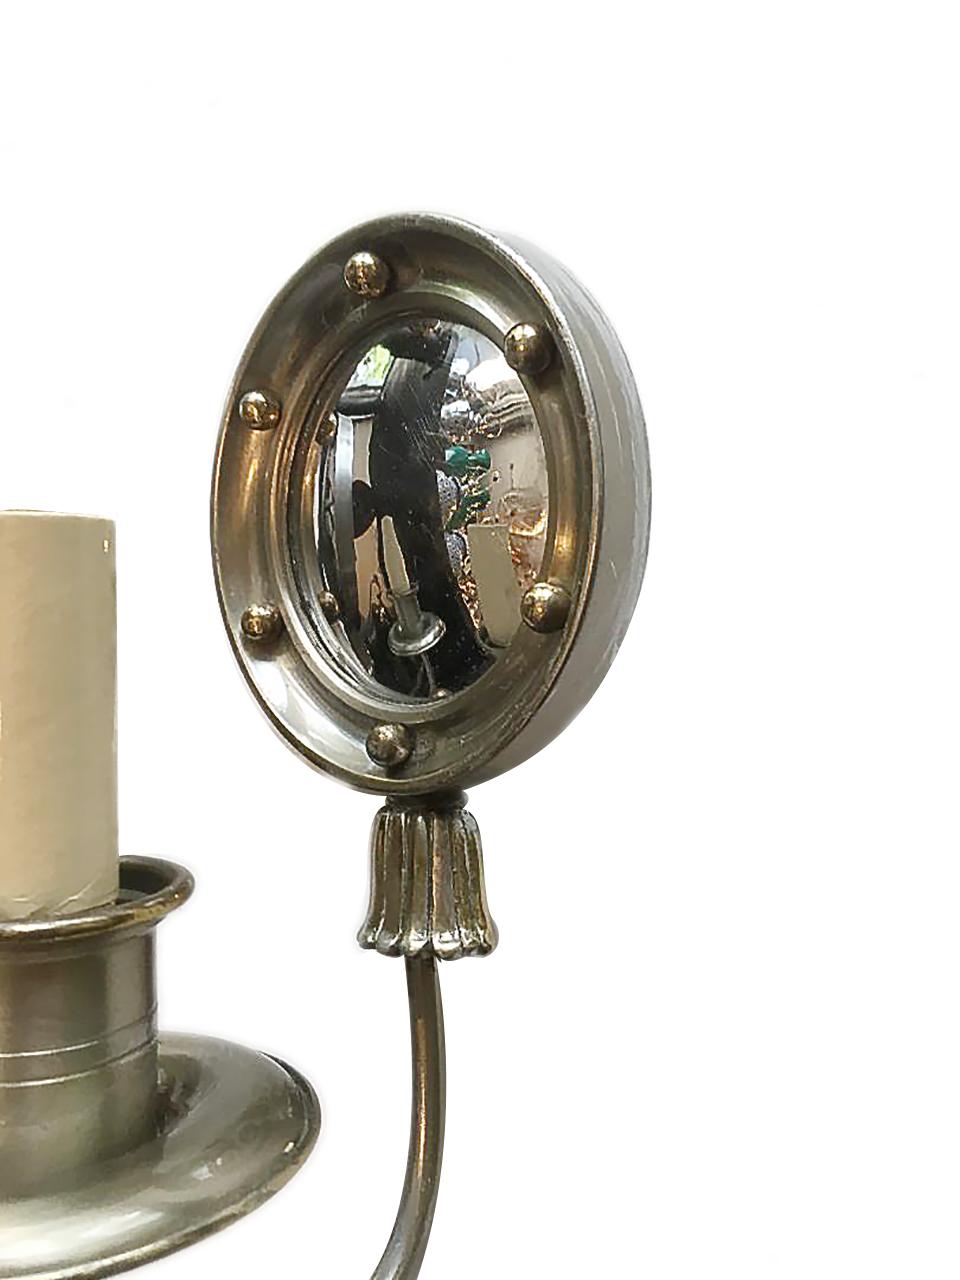 A pair of 1940s French pewter sconces with convex mirror inset.

Measurements:
Height 9